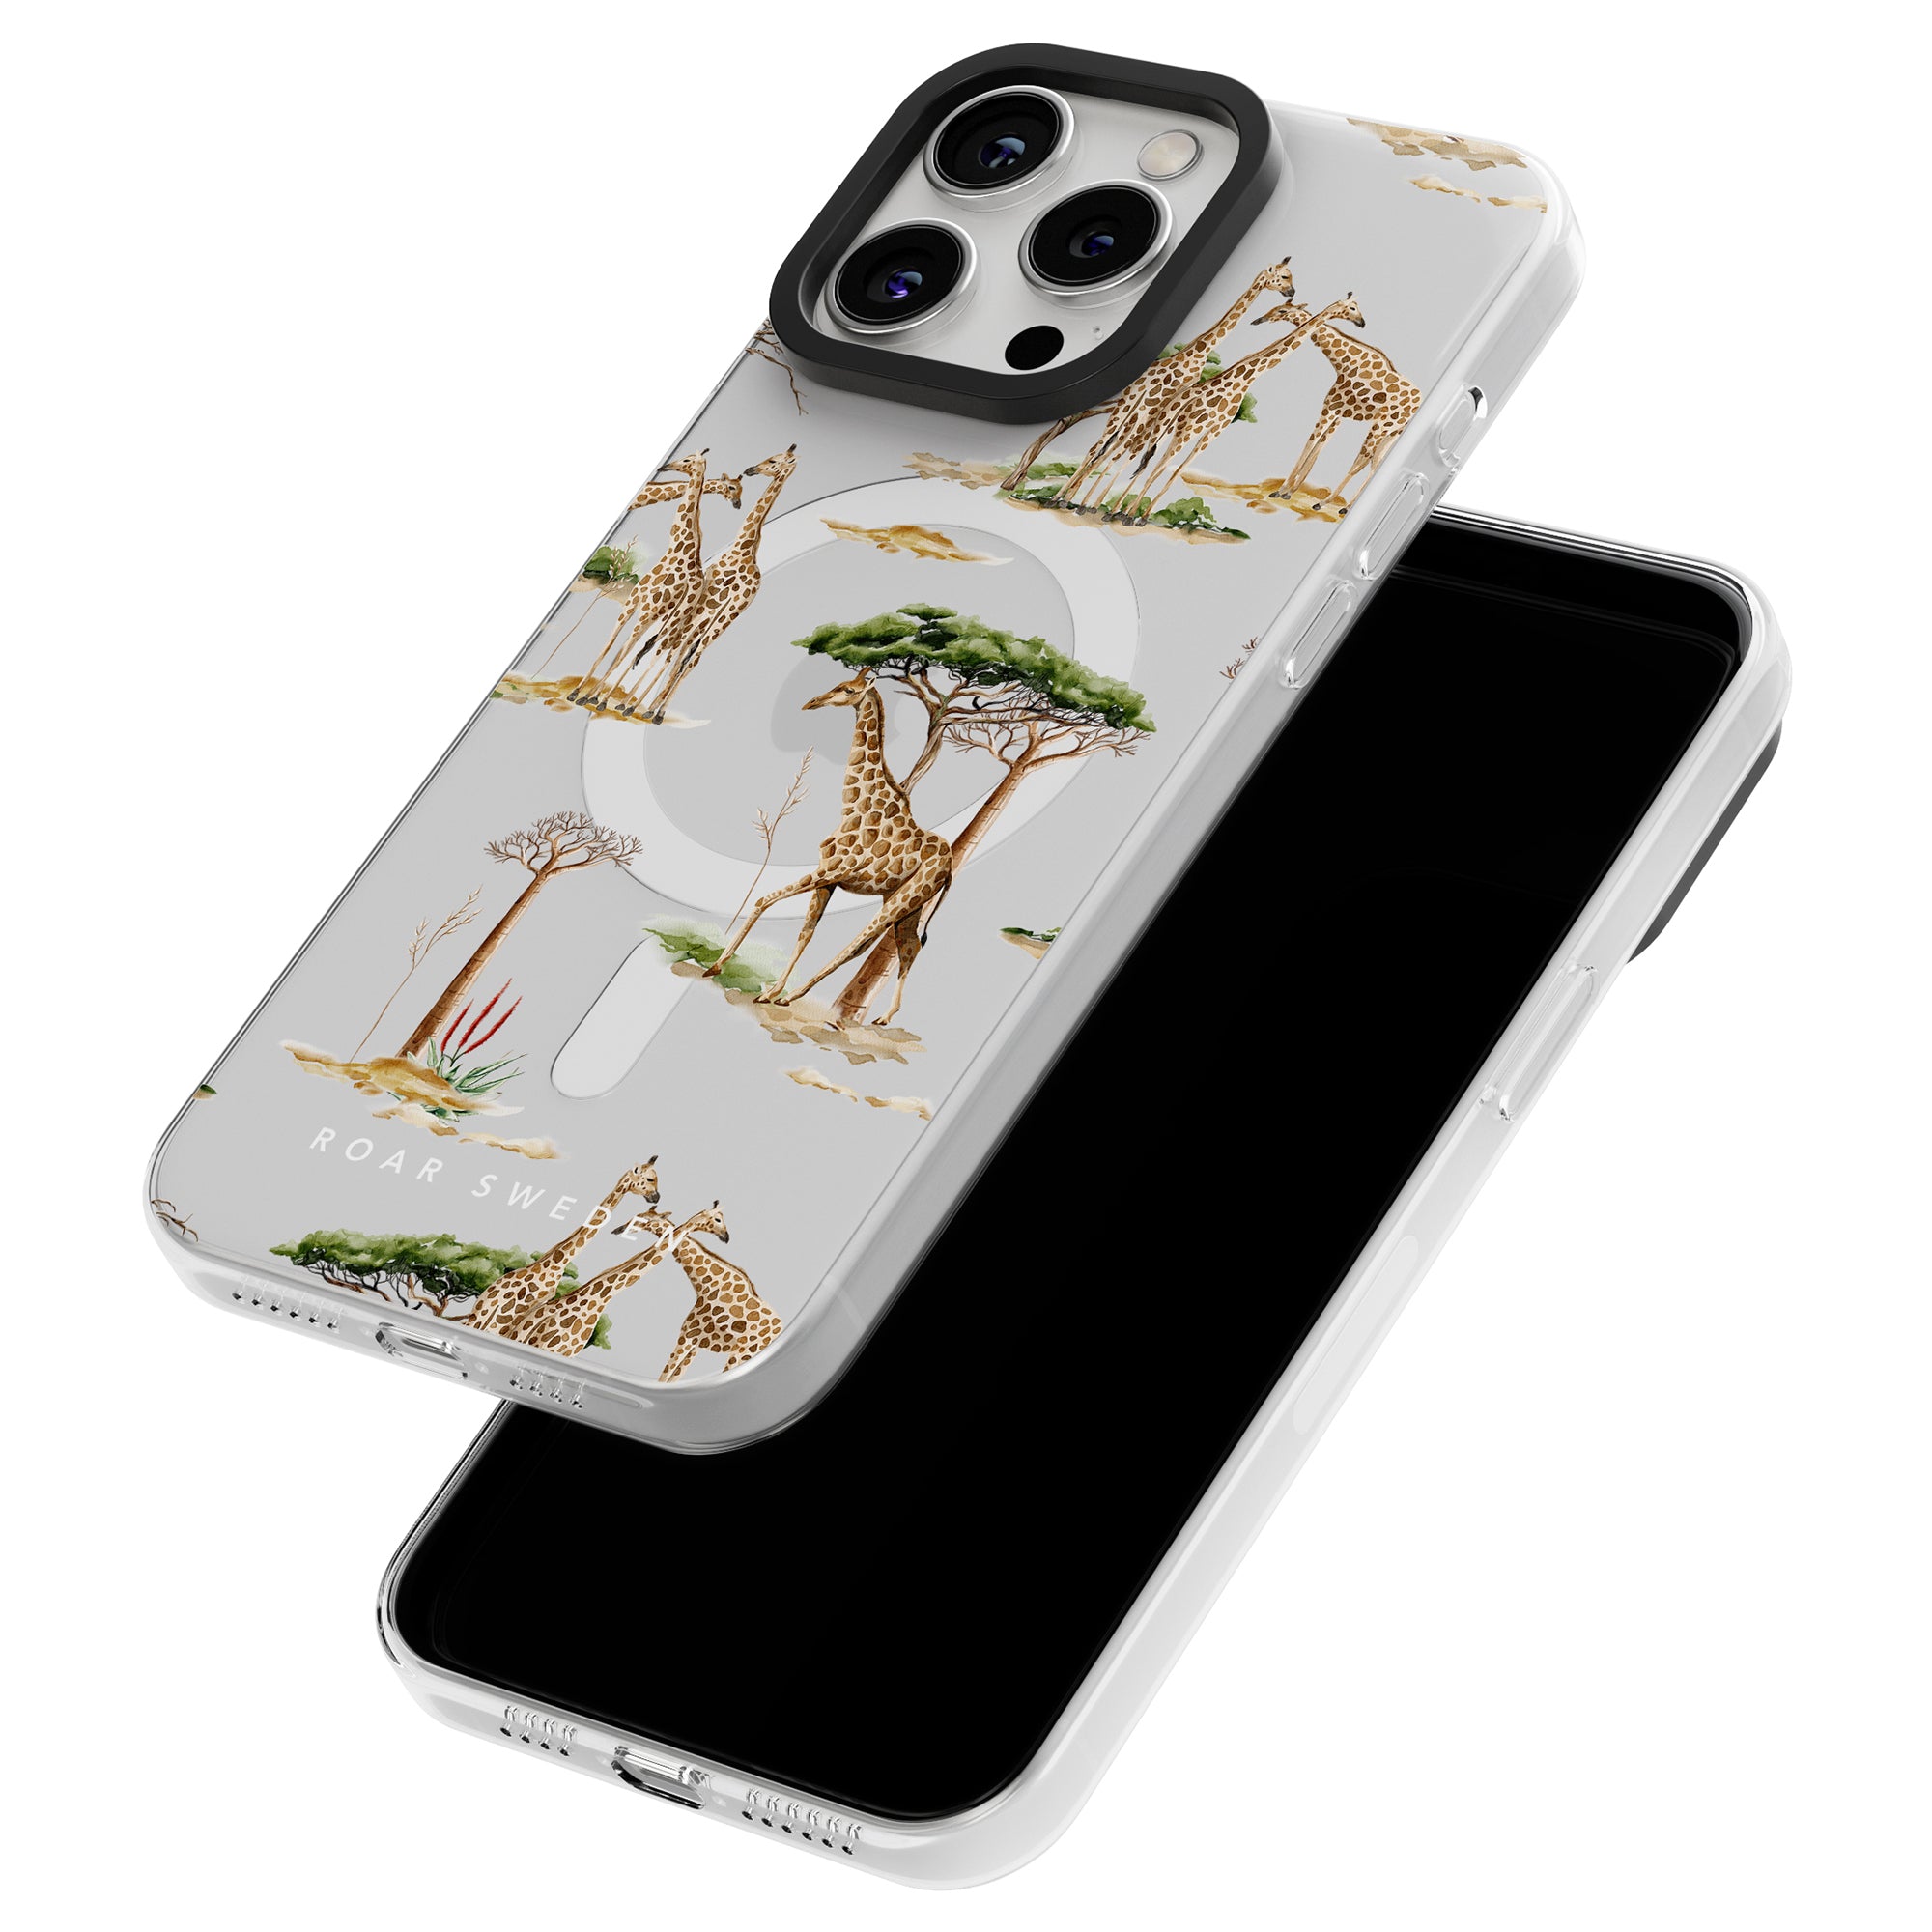 Two iPhones with giraffe-themed cases, one displaying the back showcasing the whimsical design and the other revealing the front with the screen turned off, from our unique Floral Collection featuring Giraffa - MagSafe.